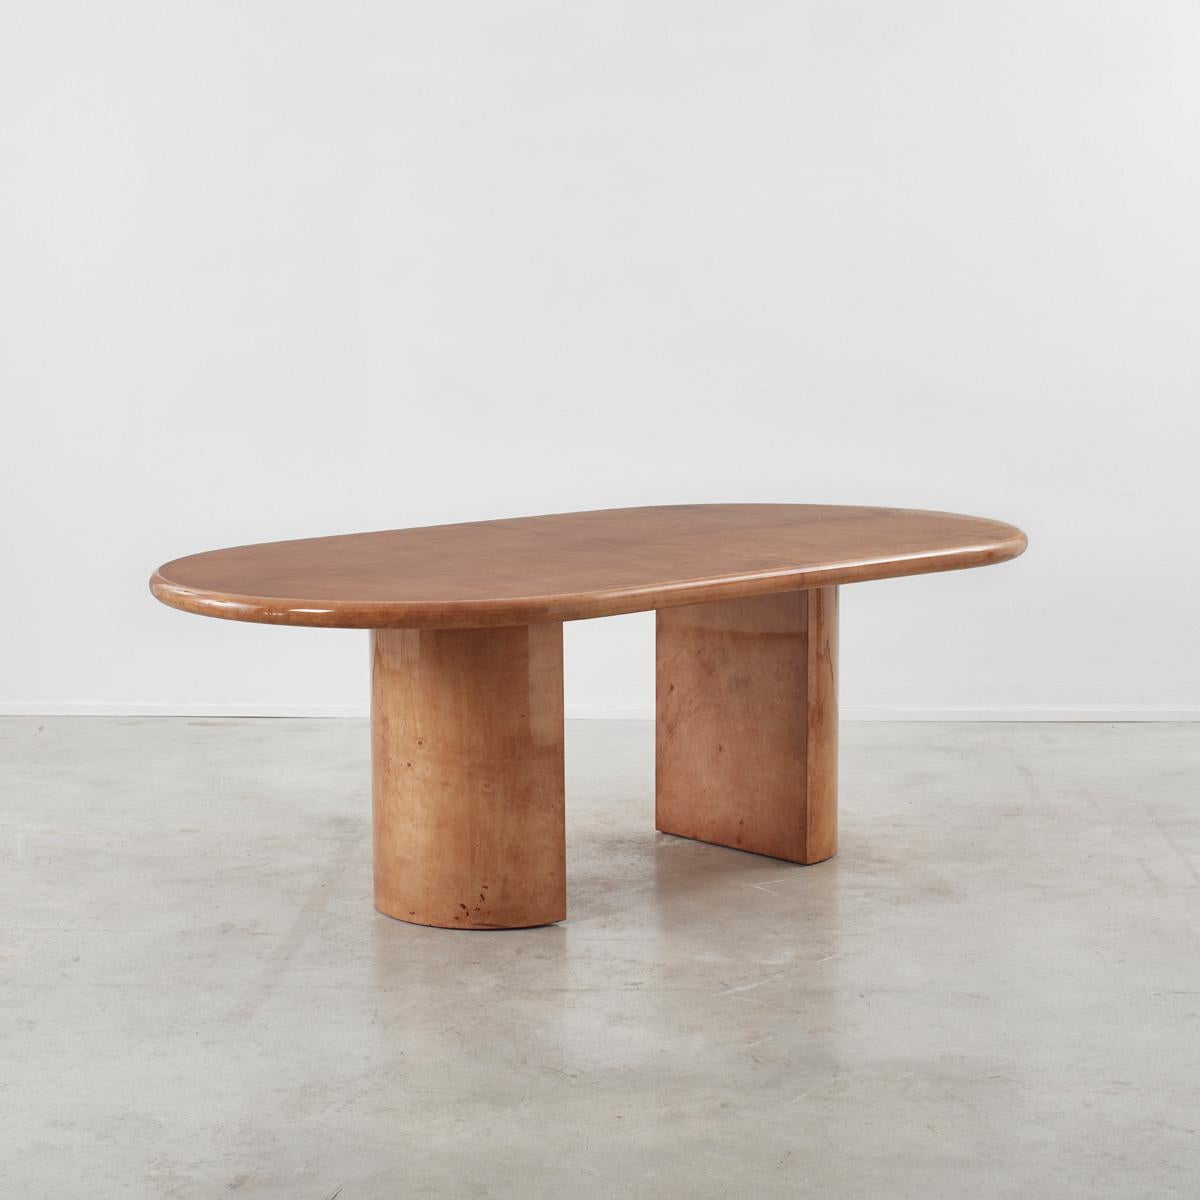 Aldo Tura (1909-1963) was a hands-on designer who experimented greatly with traditional craftsmanship hand applied craft processes and finishes out of his workshop in Milan. He is best known for his tables and lamps, which drew on shapes from the